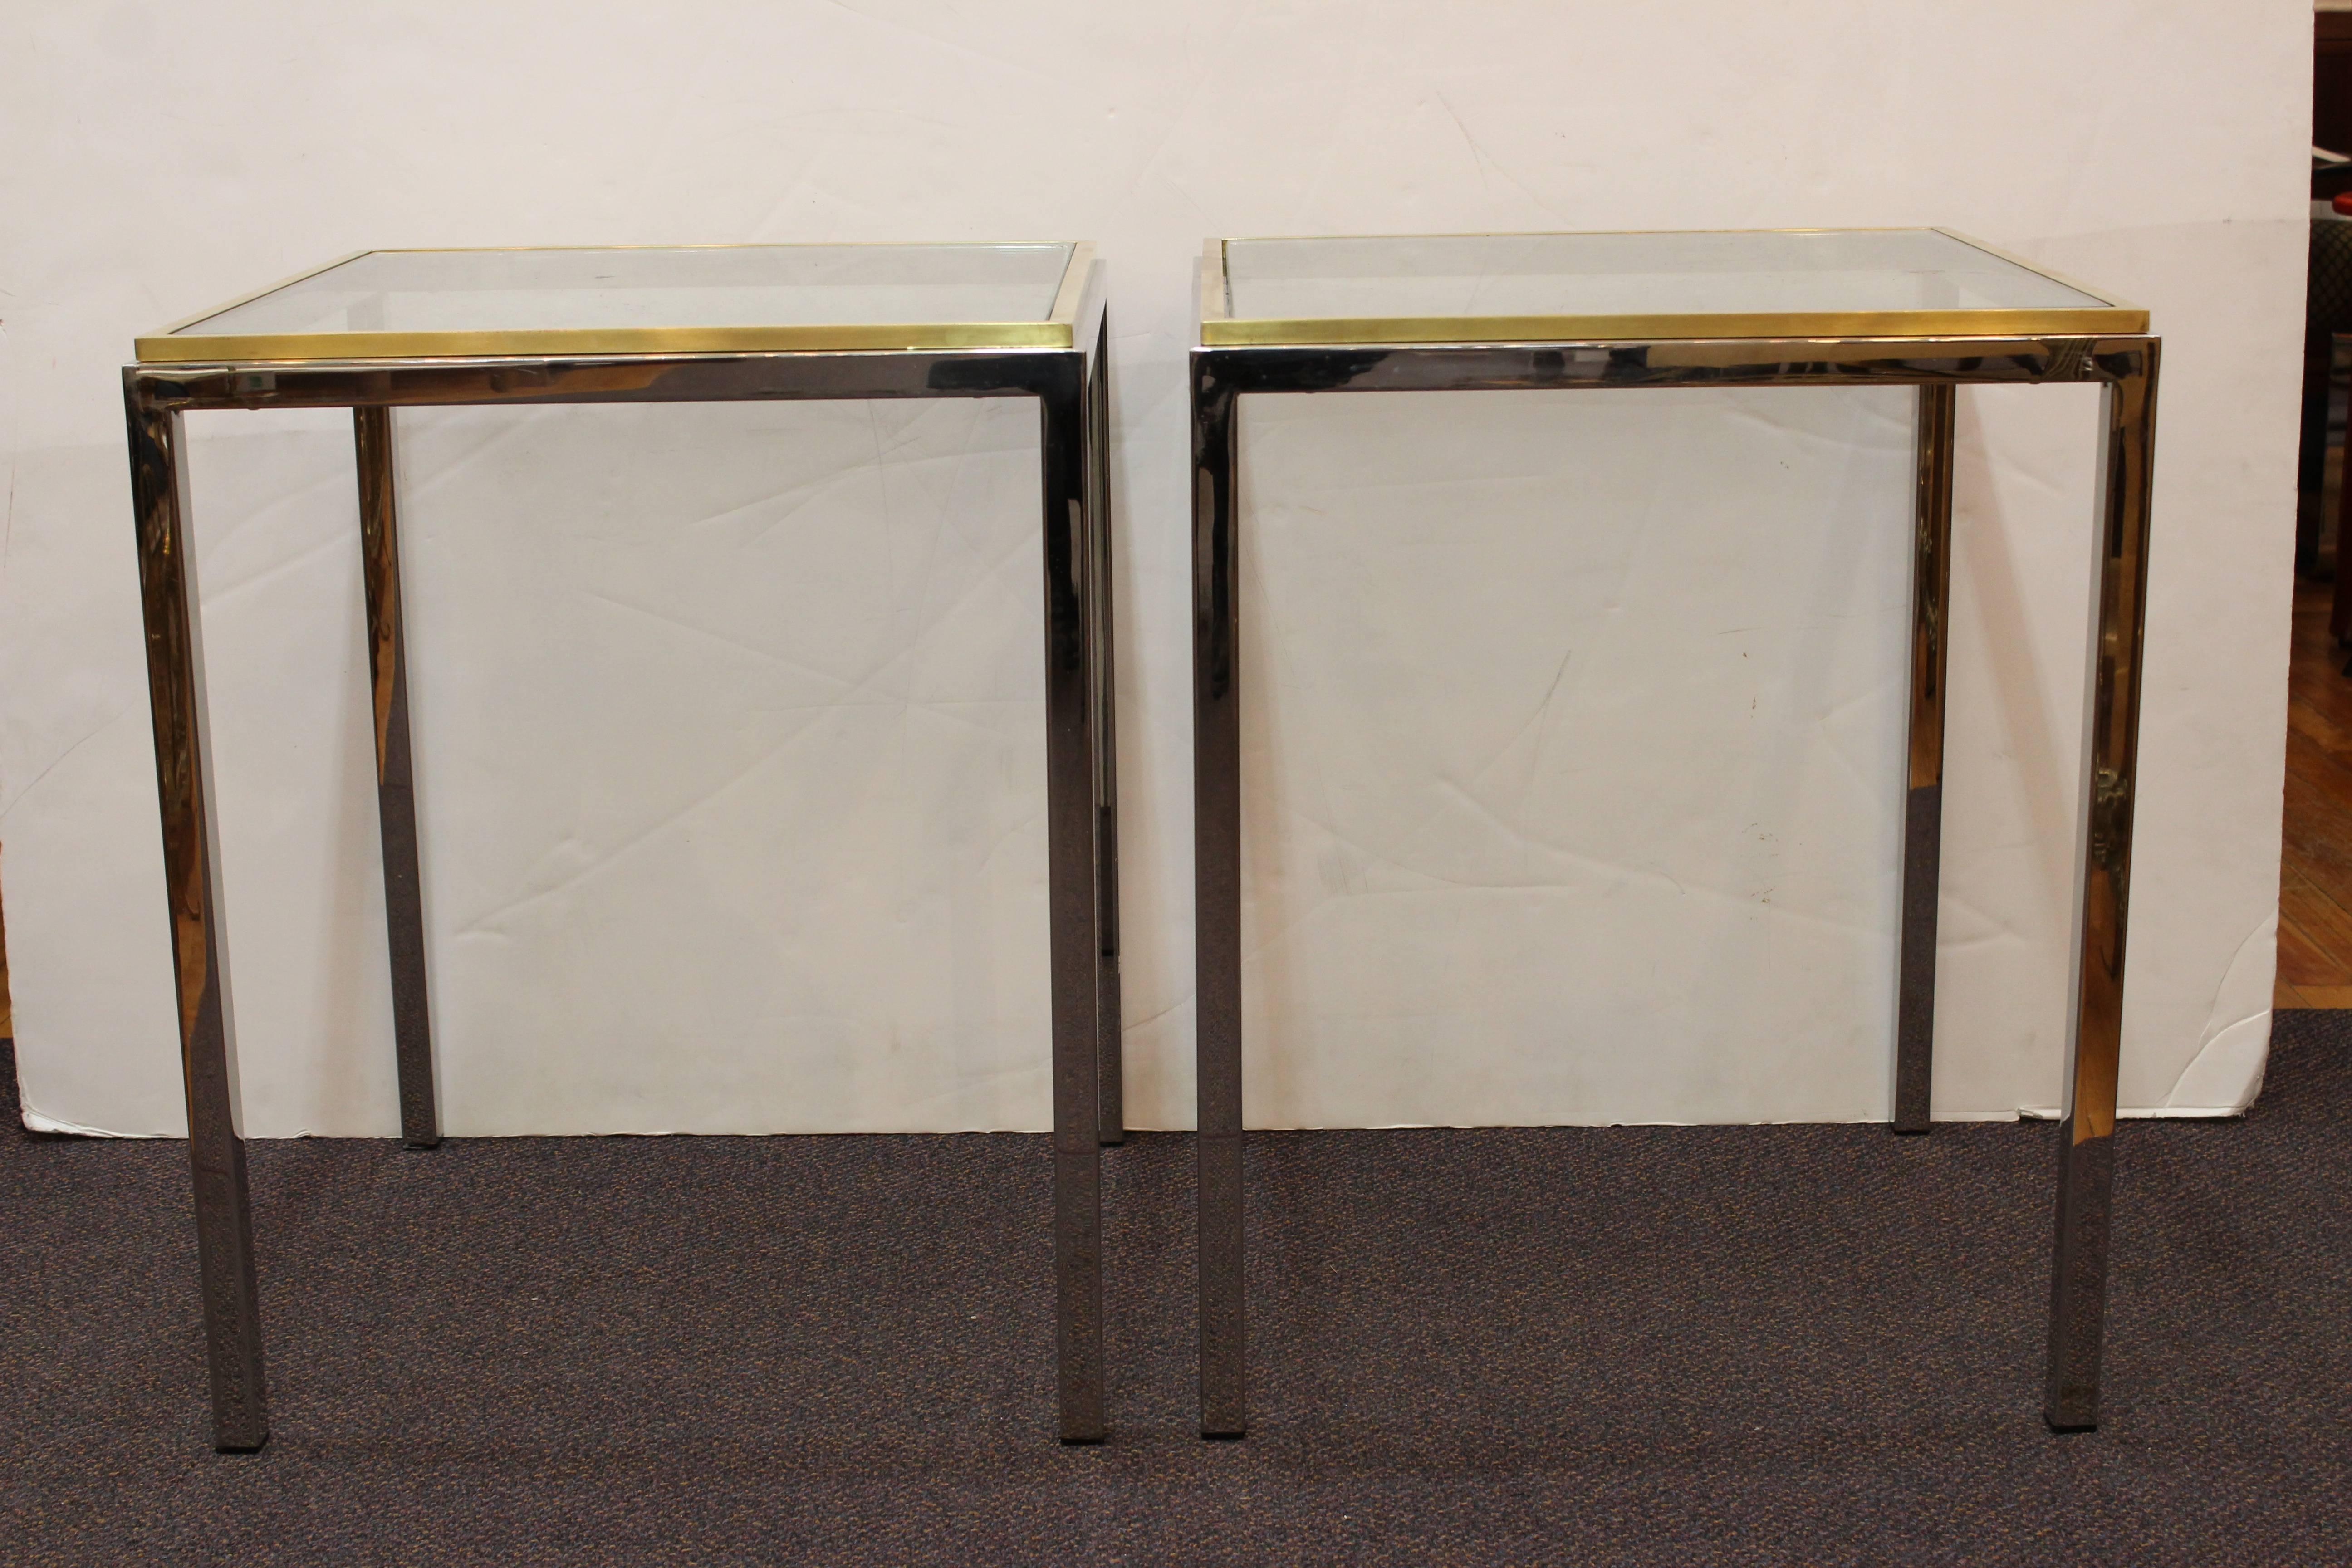 Pair of side tables attributed to Romeo Rega or Renato Zevi. The tables have square glass tops rimmed in brass. Manufactured in Italy during the 1970s, the side tables remain in good vintage condition with no pitting to chrome and minor scuffs.